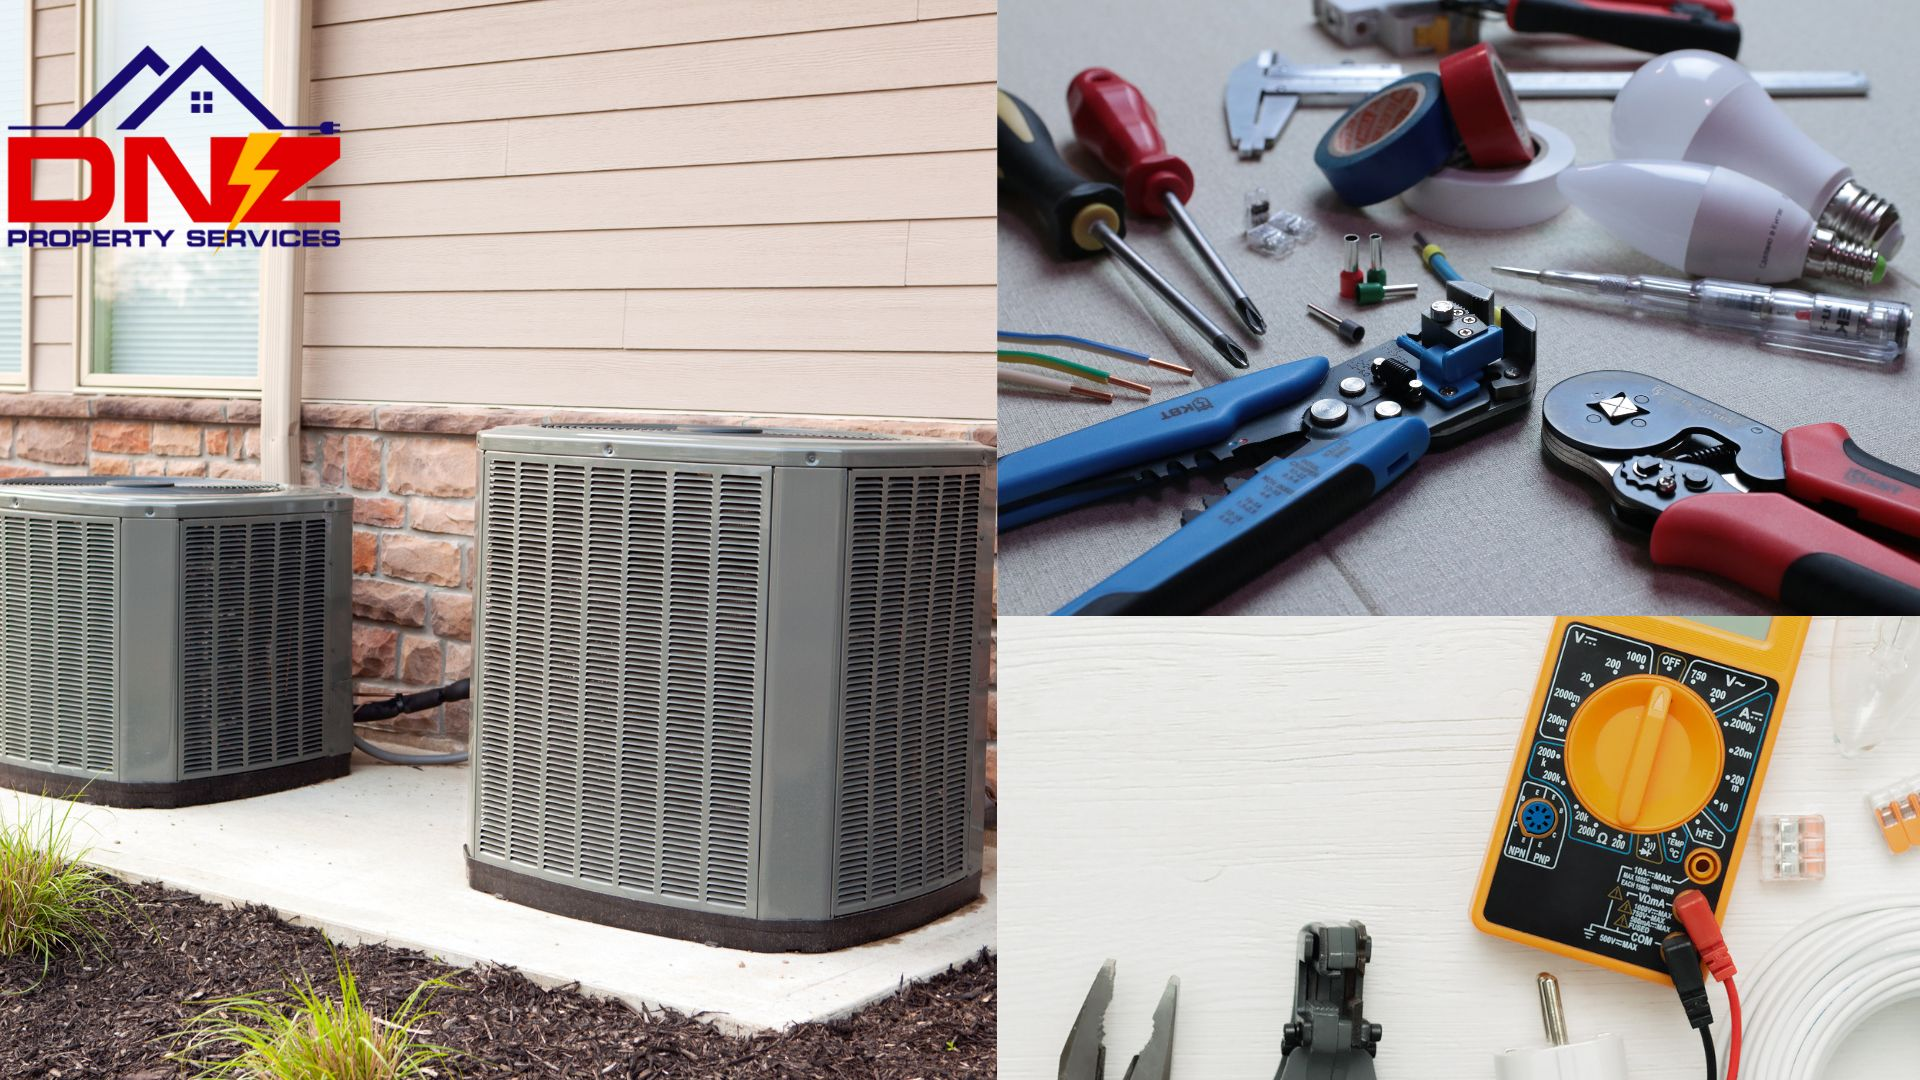 An image of an air conditioner and a heat pump